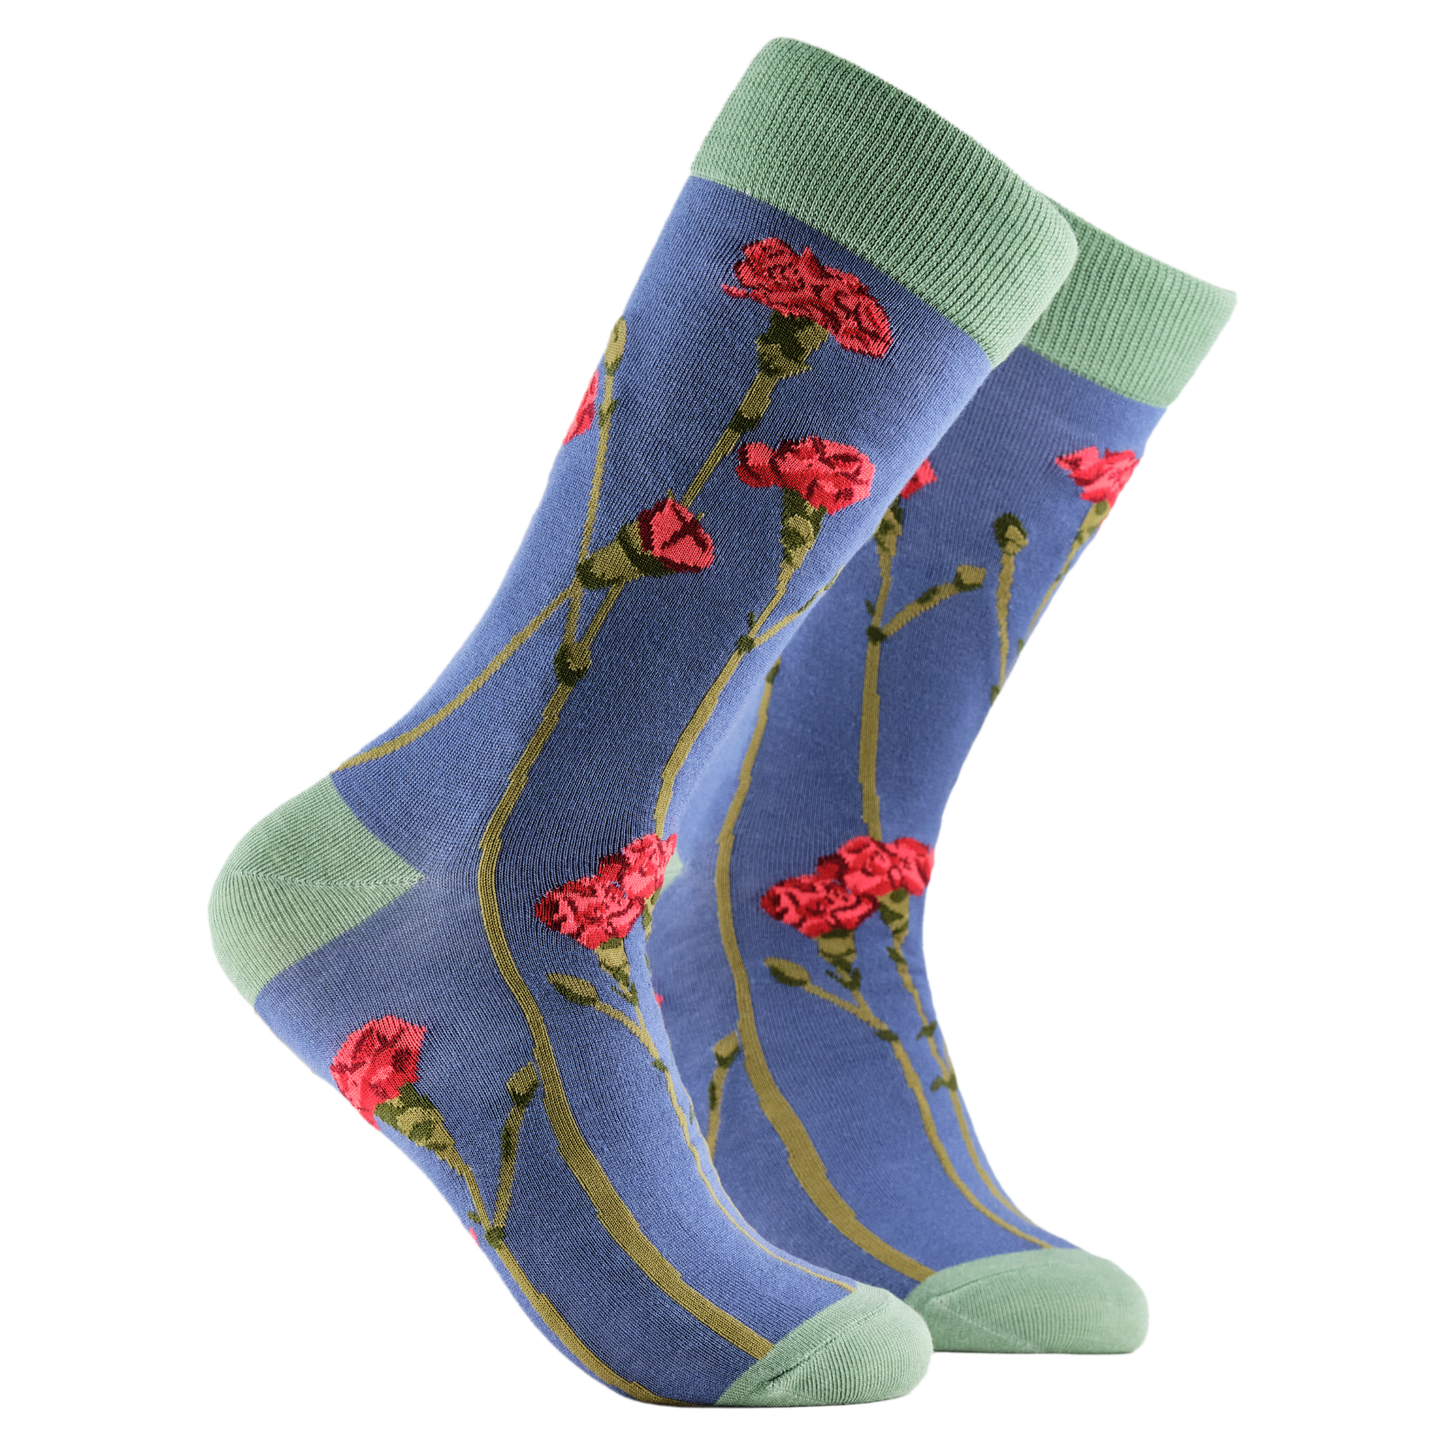 Carnations Floral Bamboo Socks. A pair of socks depicting carnations in wildlife. Blue legs, light green cuff, heel and toe.